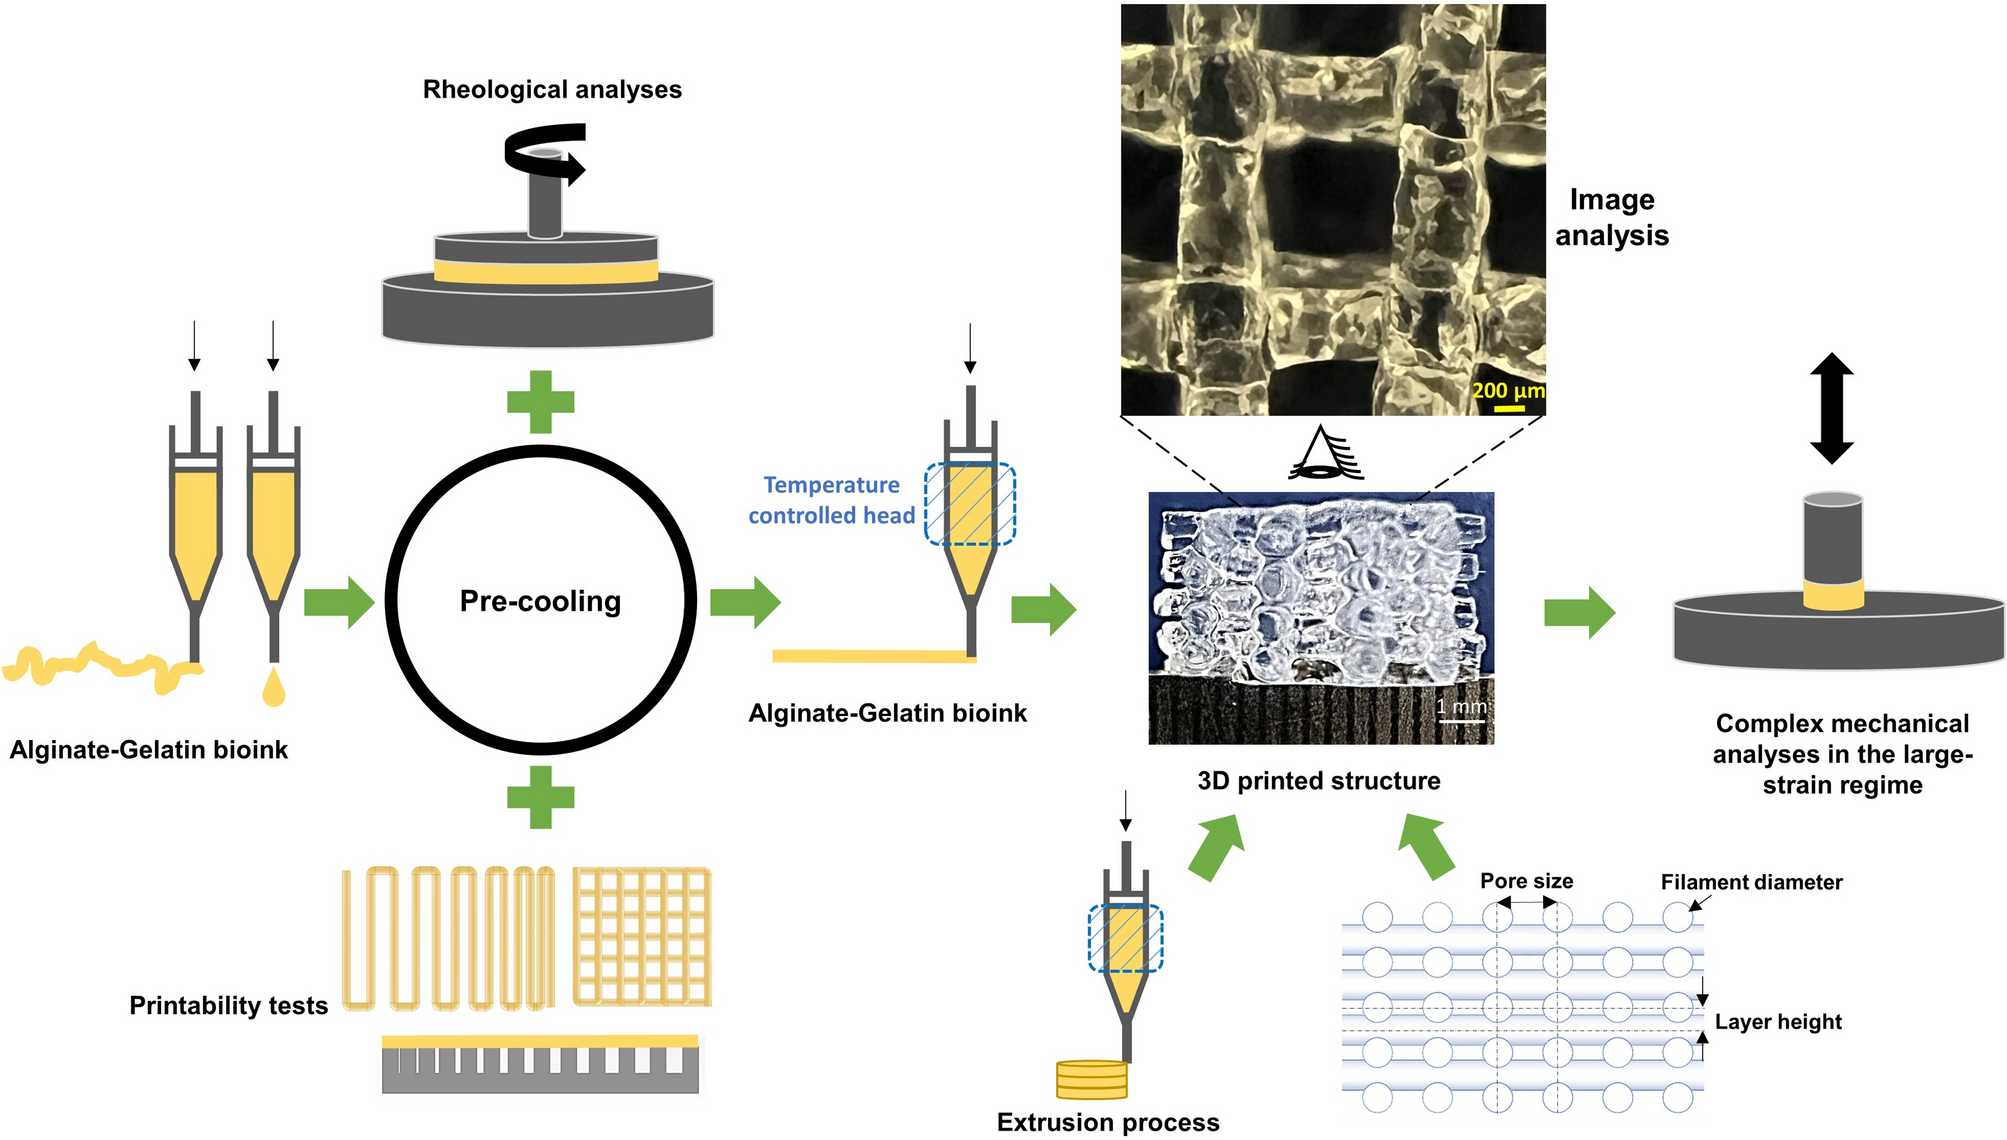 Multilayer 3D bioprinting and complex mechanical properties of alginate- gelatin mesostructures